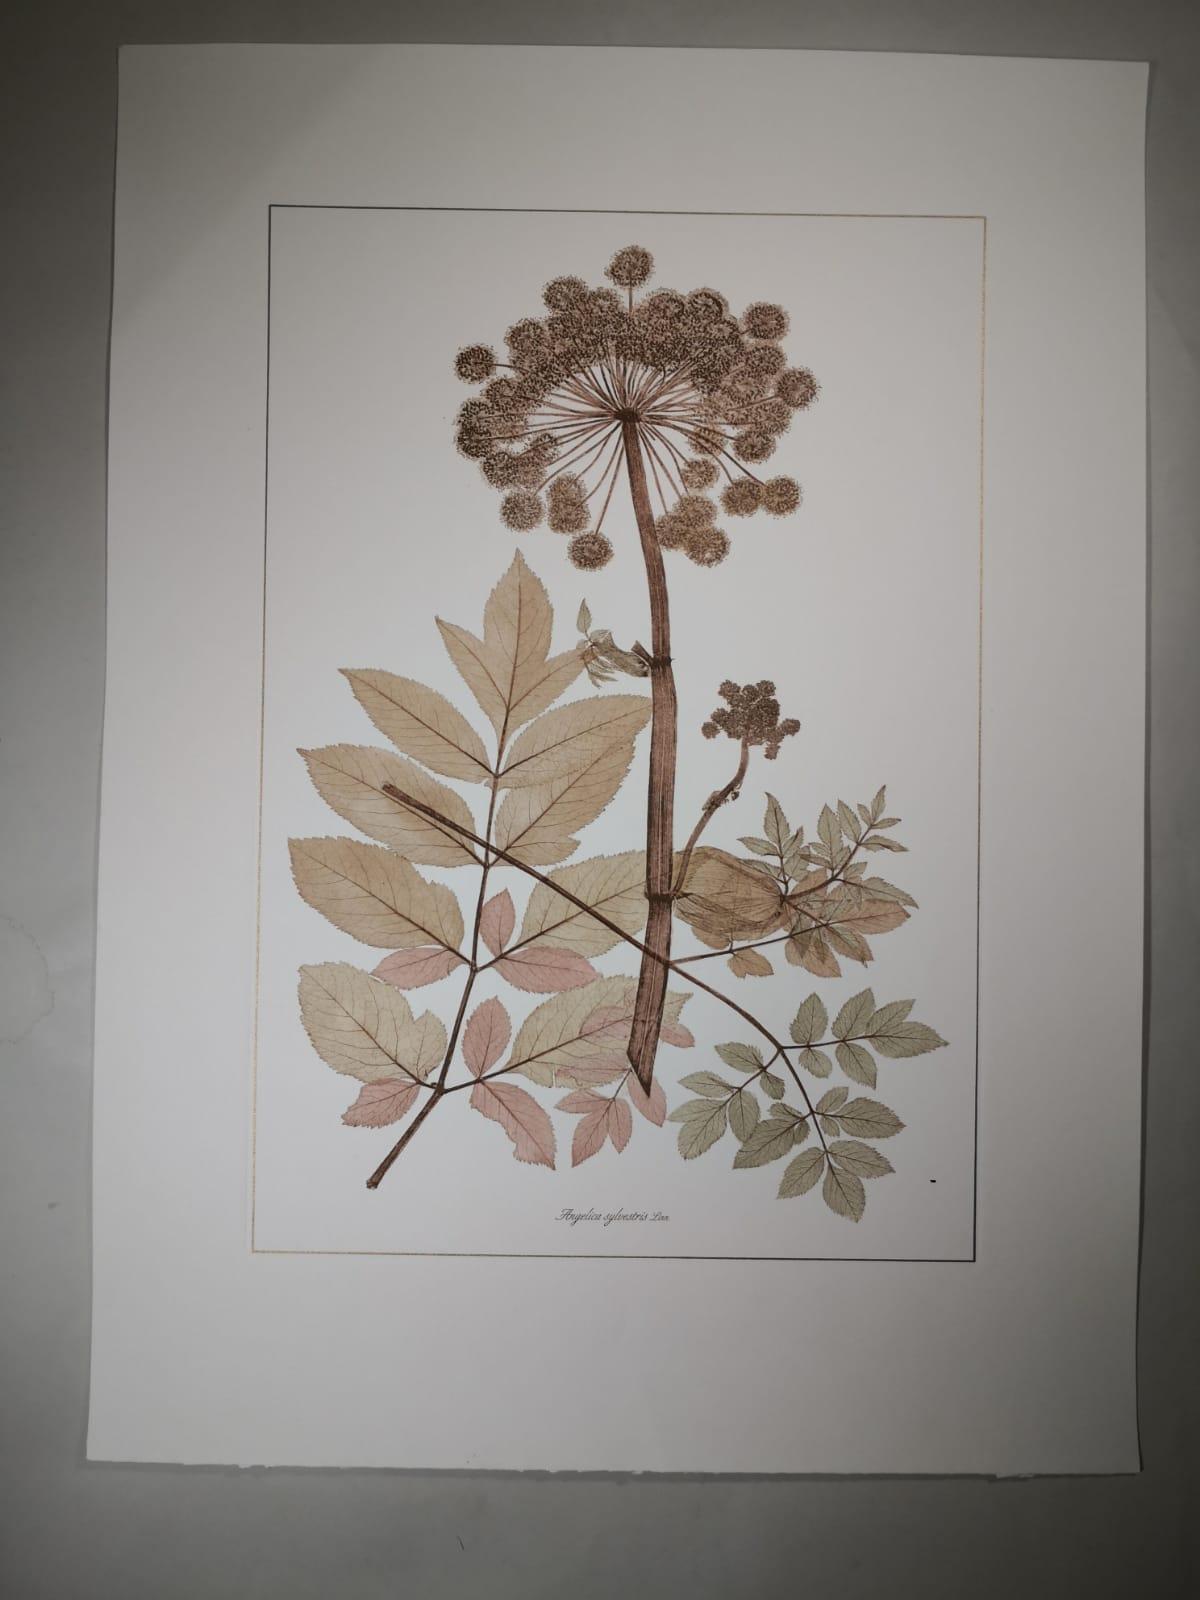 Elegant hand-watercoloured print representing the flowering and wild plant Angelica Sylvestris painted with notes of antique rose. 

This botanical style print is available in 4 different natural representations to create a bright and joyful